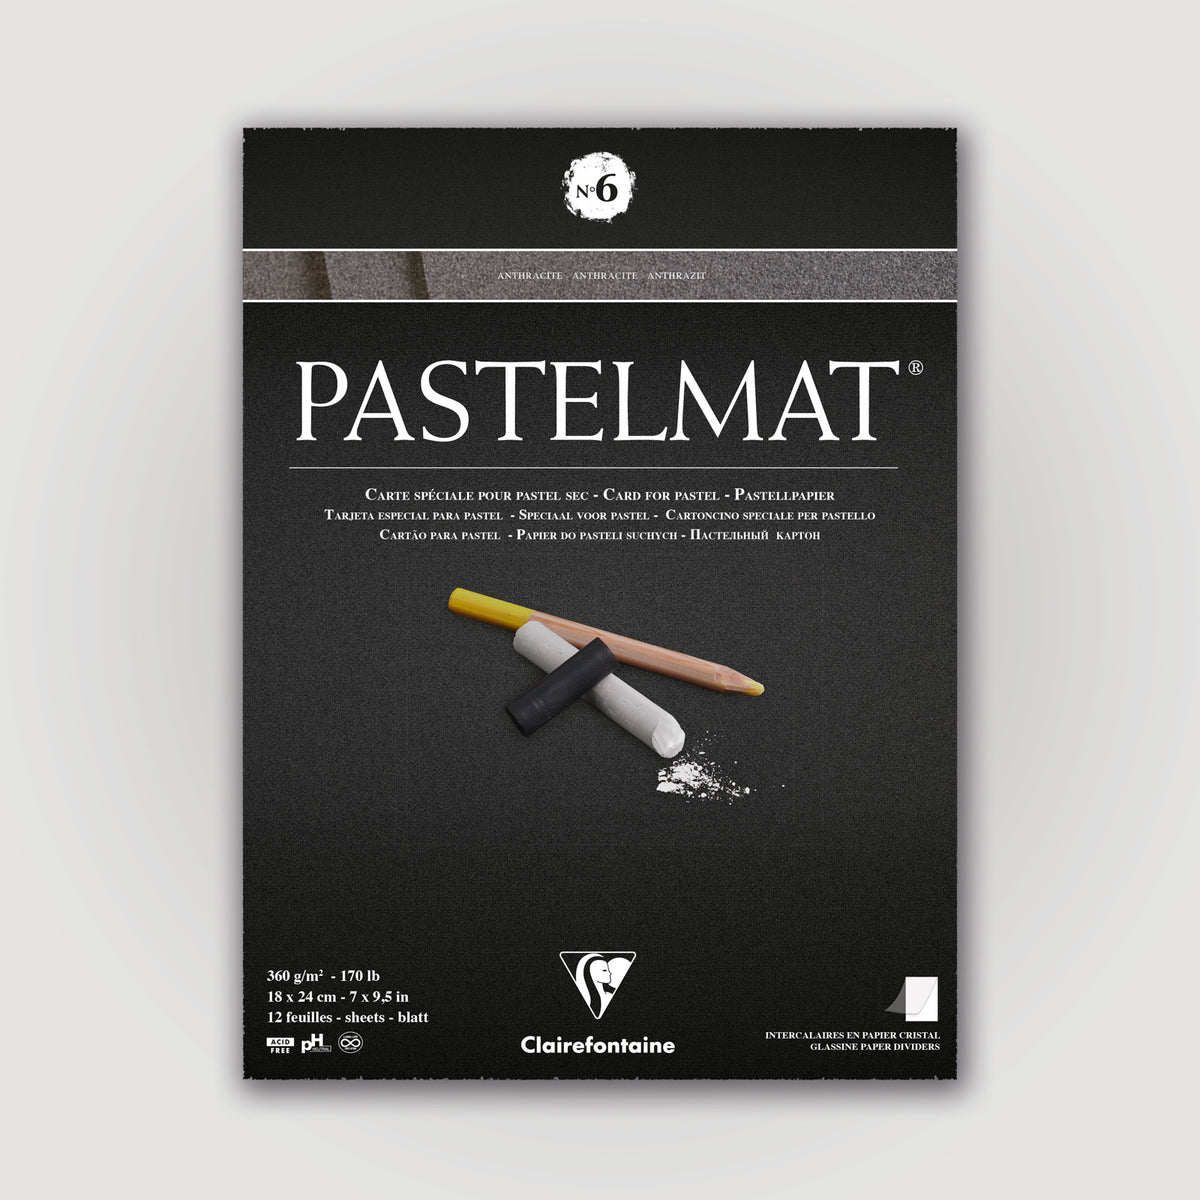 Clairefontaine Pastelmat N°6 360g 18x24 antr 12 sheets